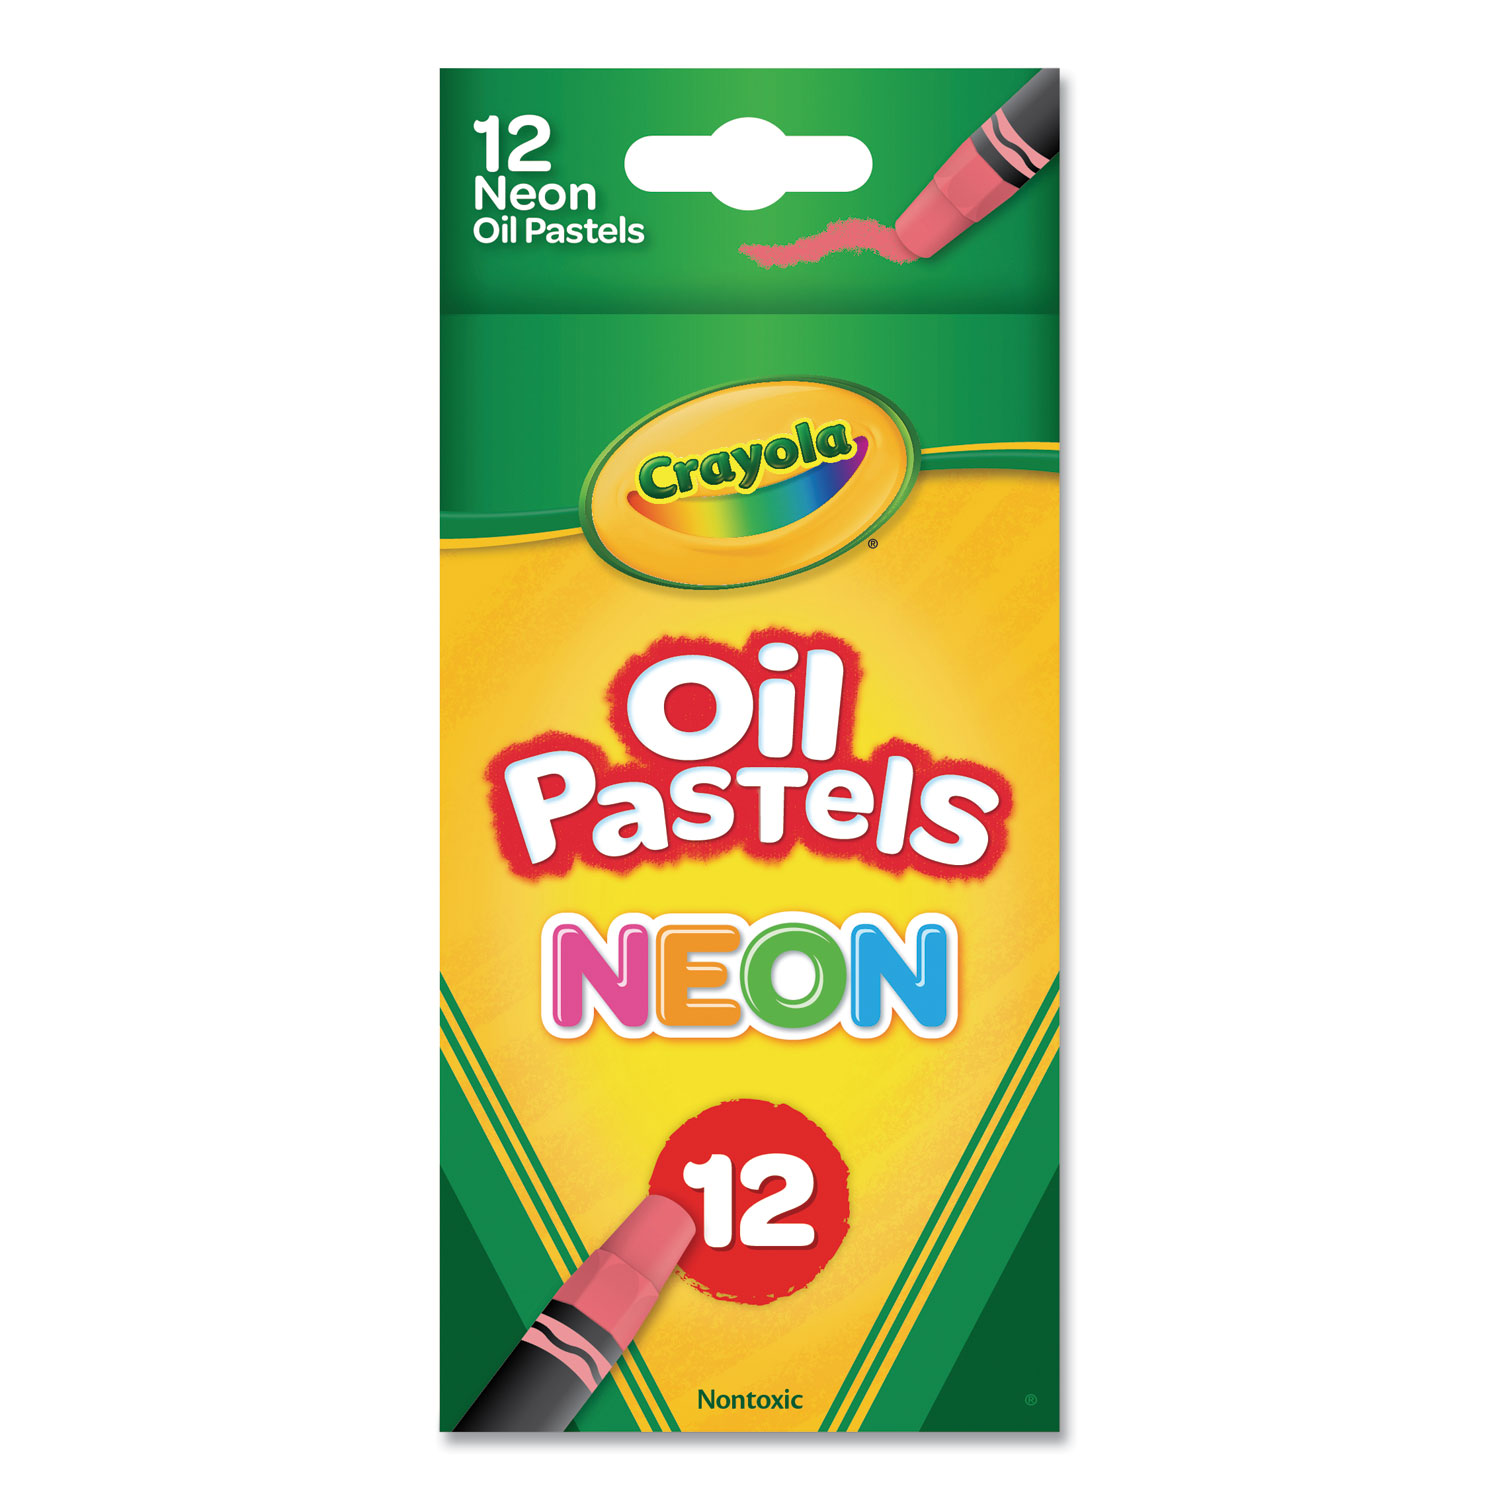 Crayola Neon Oil Pastels, 12 Assorted Colors, 12/Pack